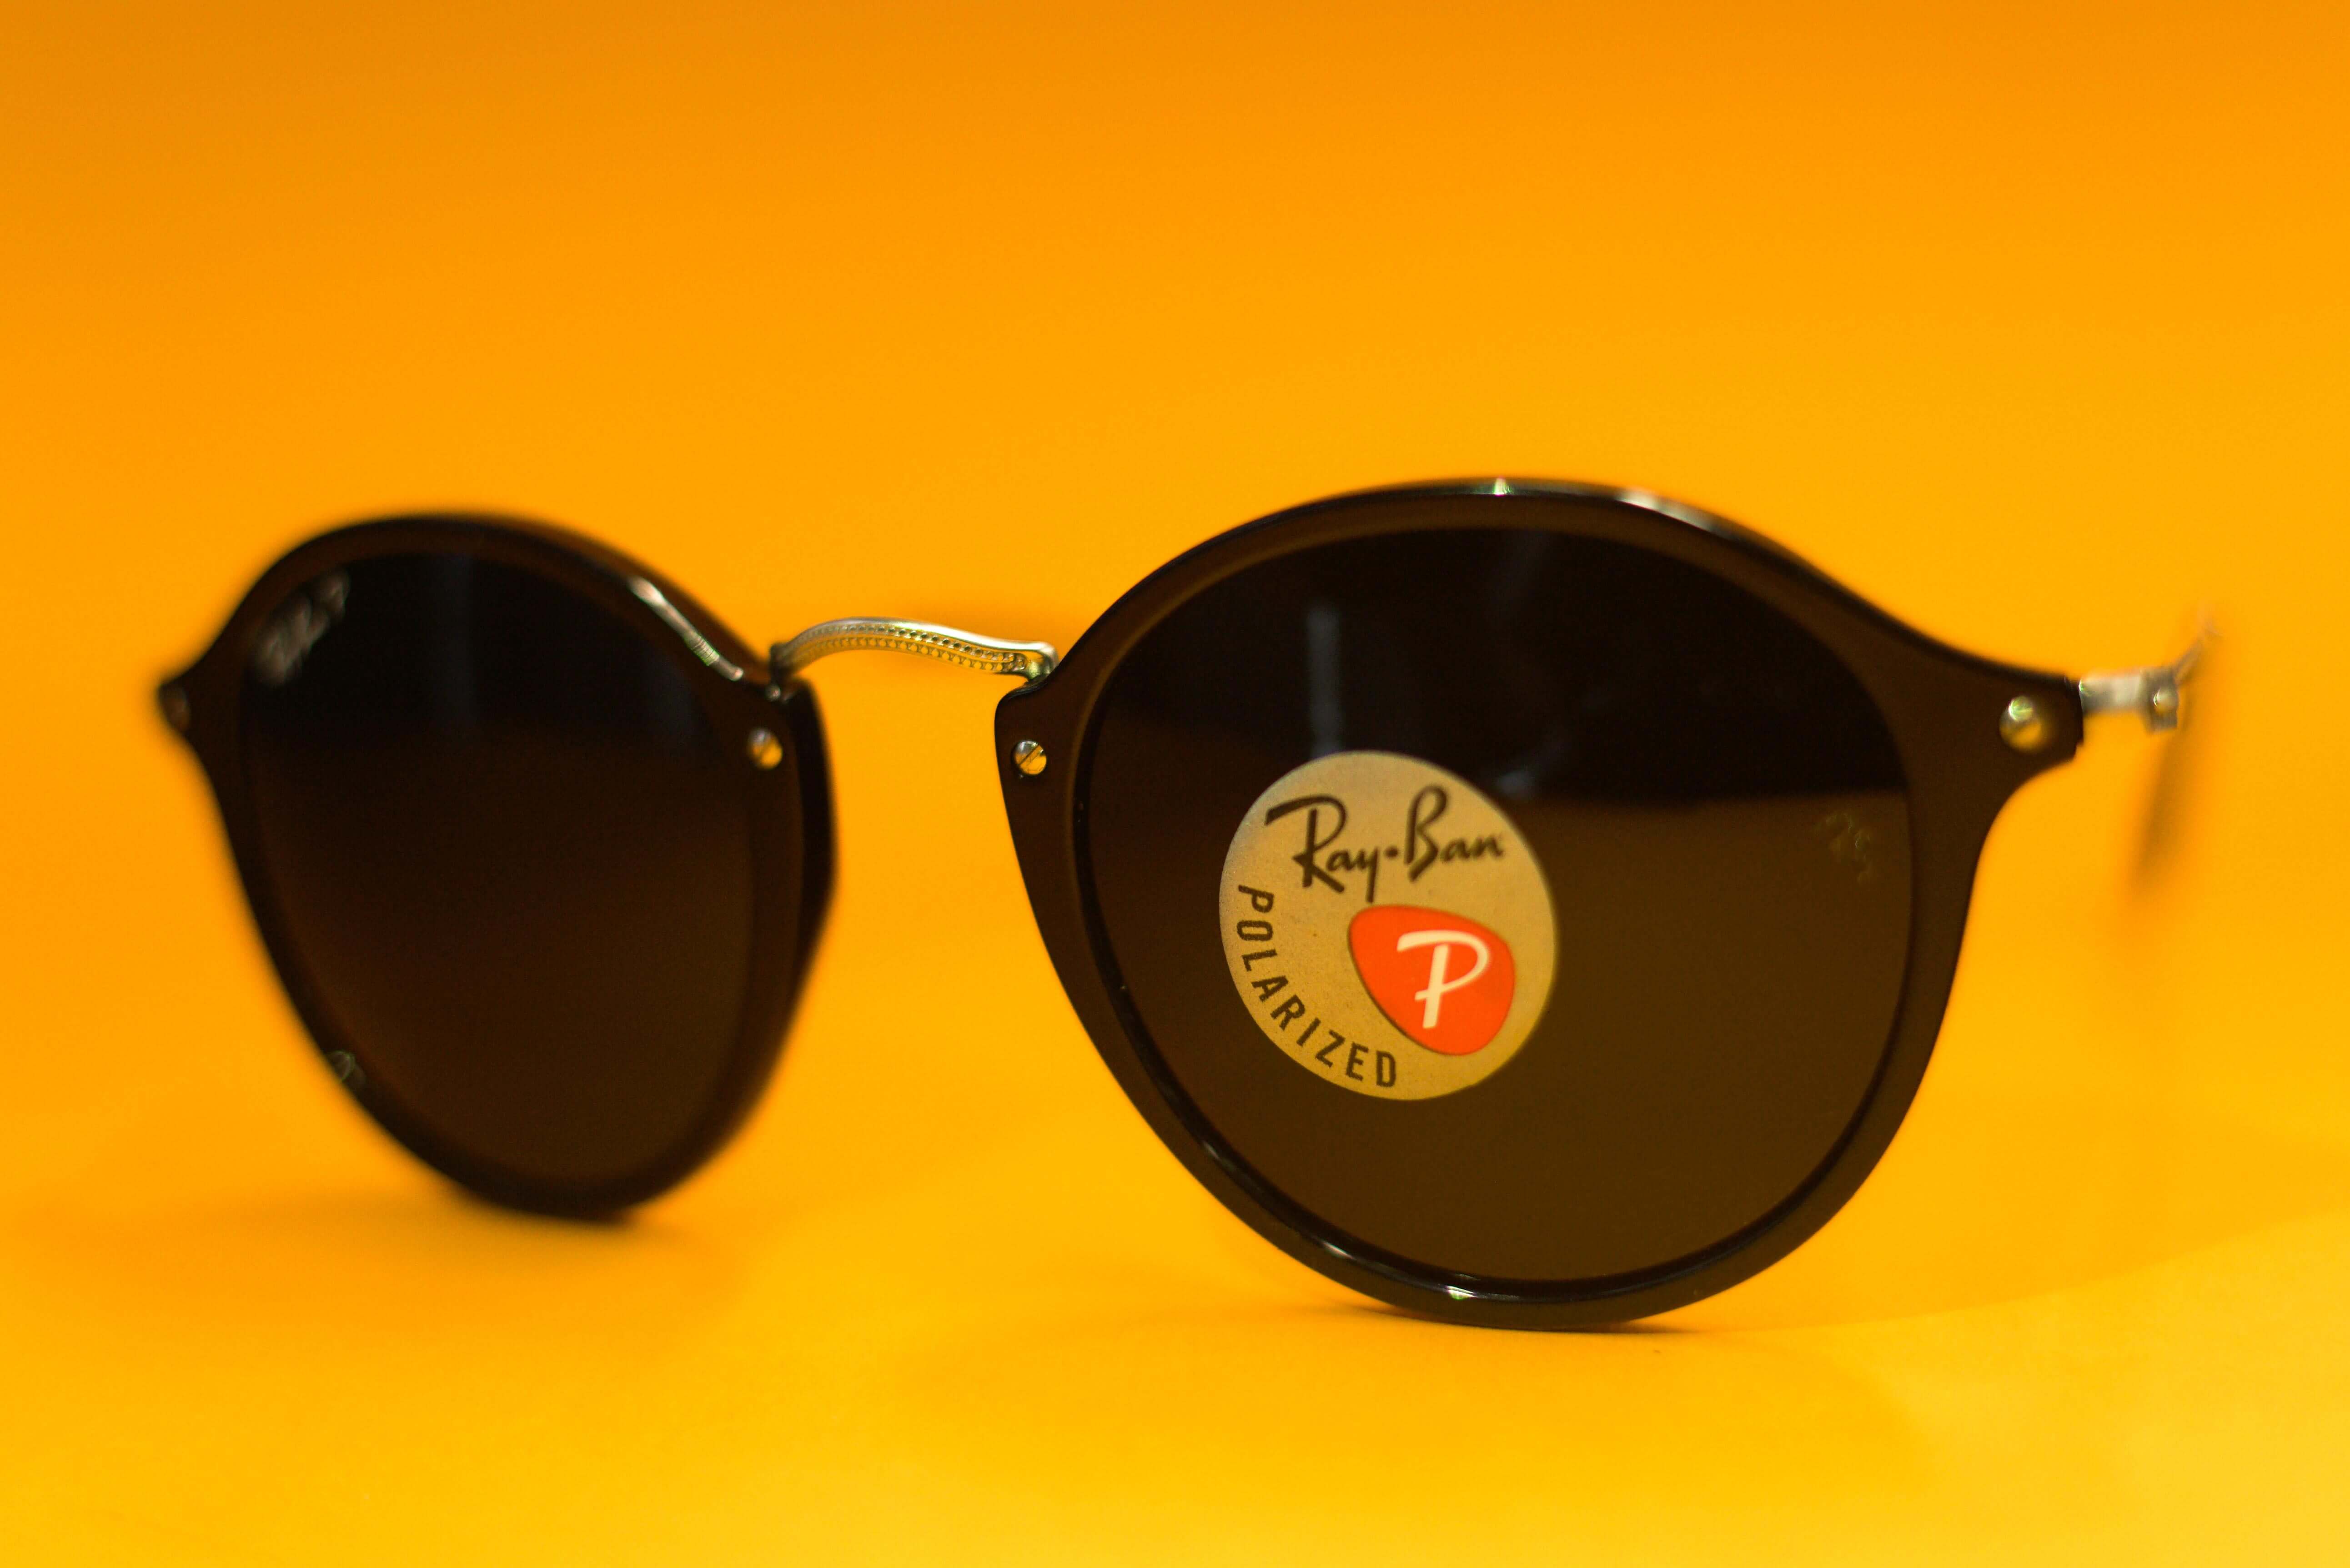 Ray-Ban Logo - Guide To Spotting Authentic Ray Ban Sunglasses